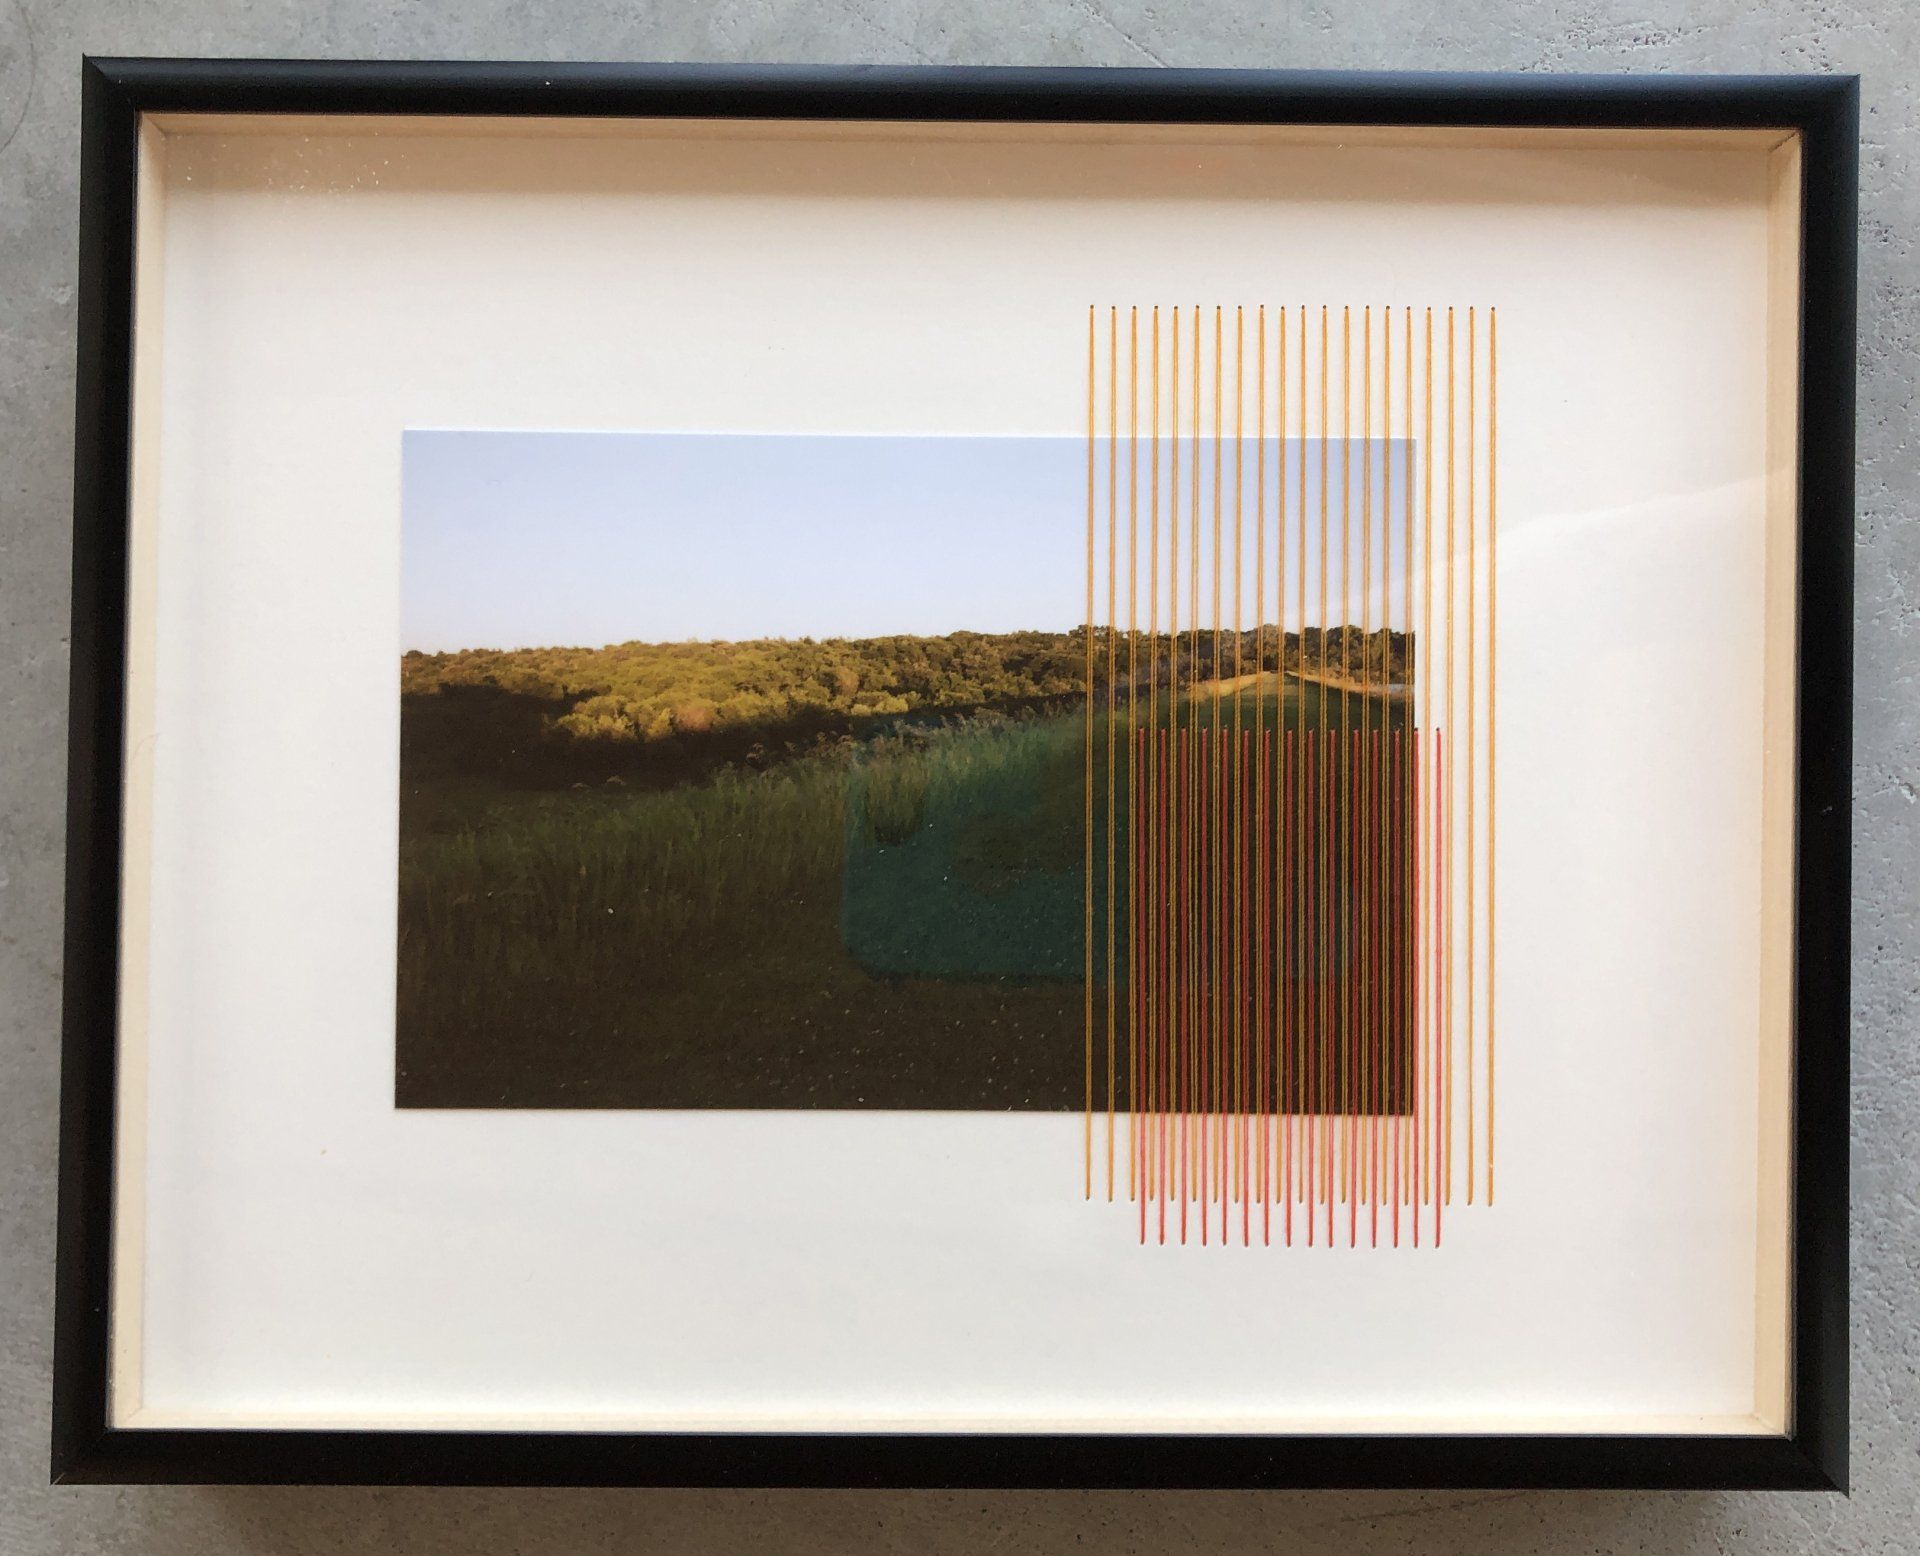 Olivia Valentine, Field Edging #16 (Viking Lake), Photograph and thread on archival board, 8 x 10 in, $400